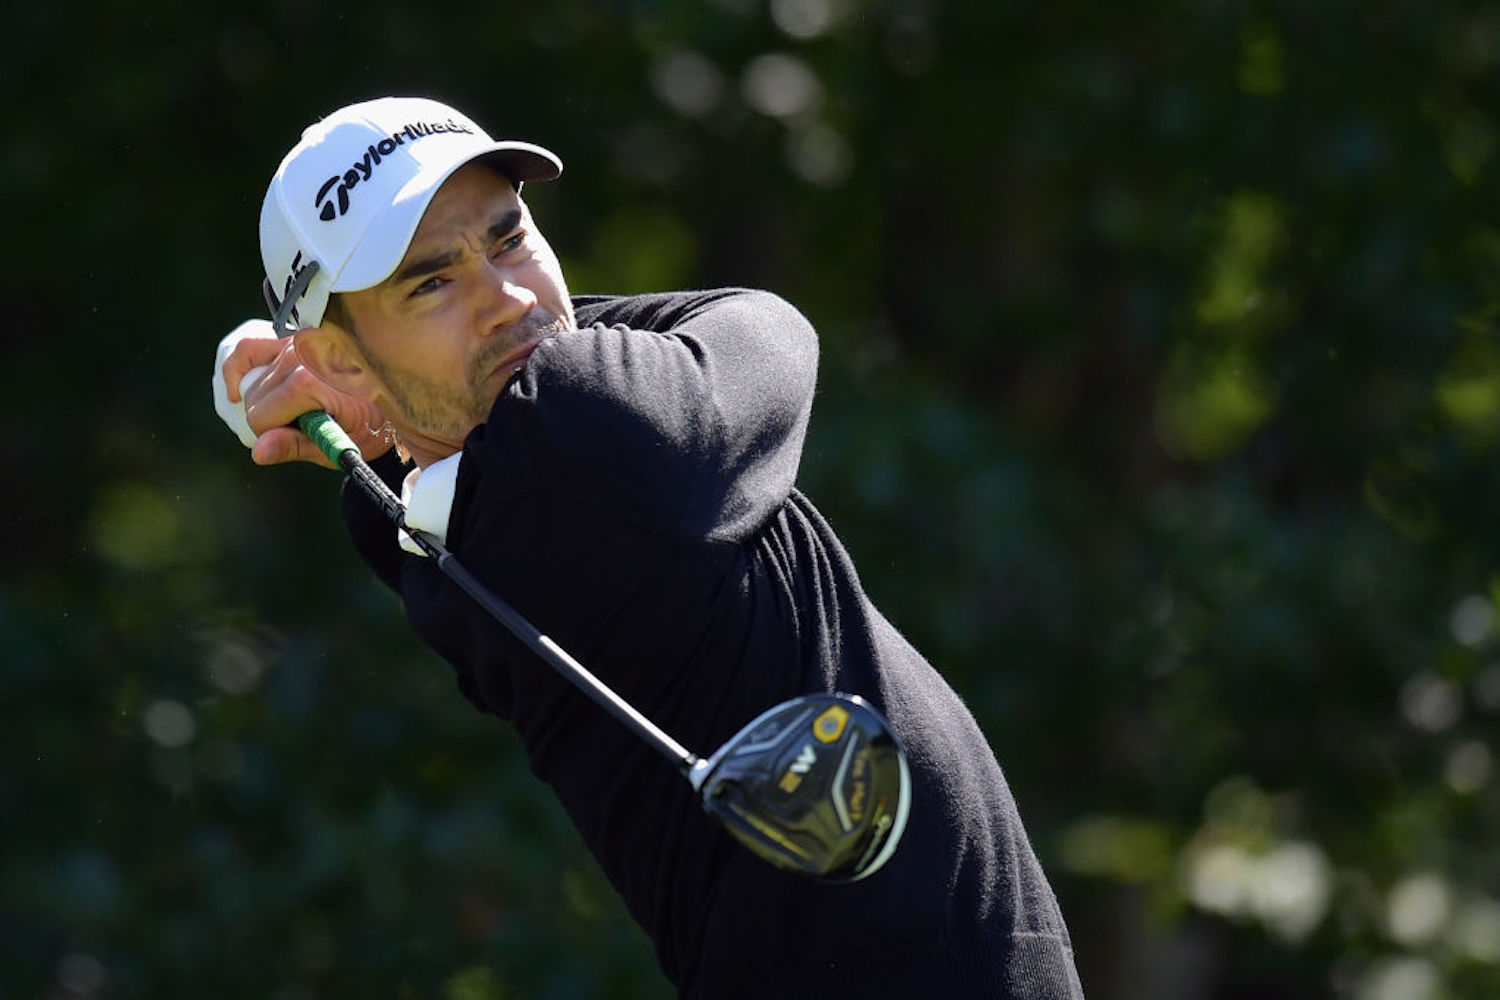 Camilo Villegas has been taking time away from golf to be with his 22-month-old daughter, but she passed away Sunday after battling tumors.